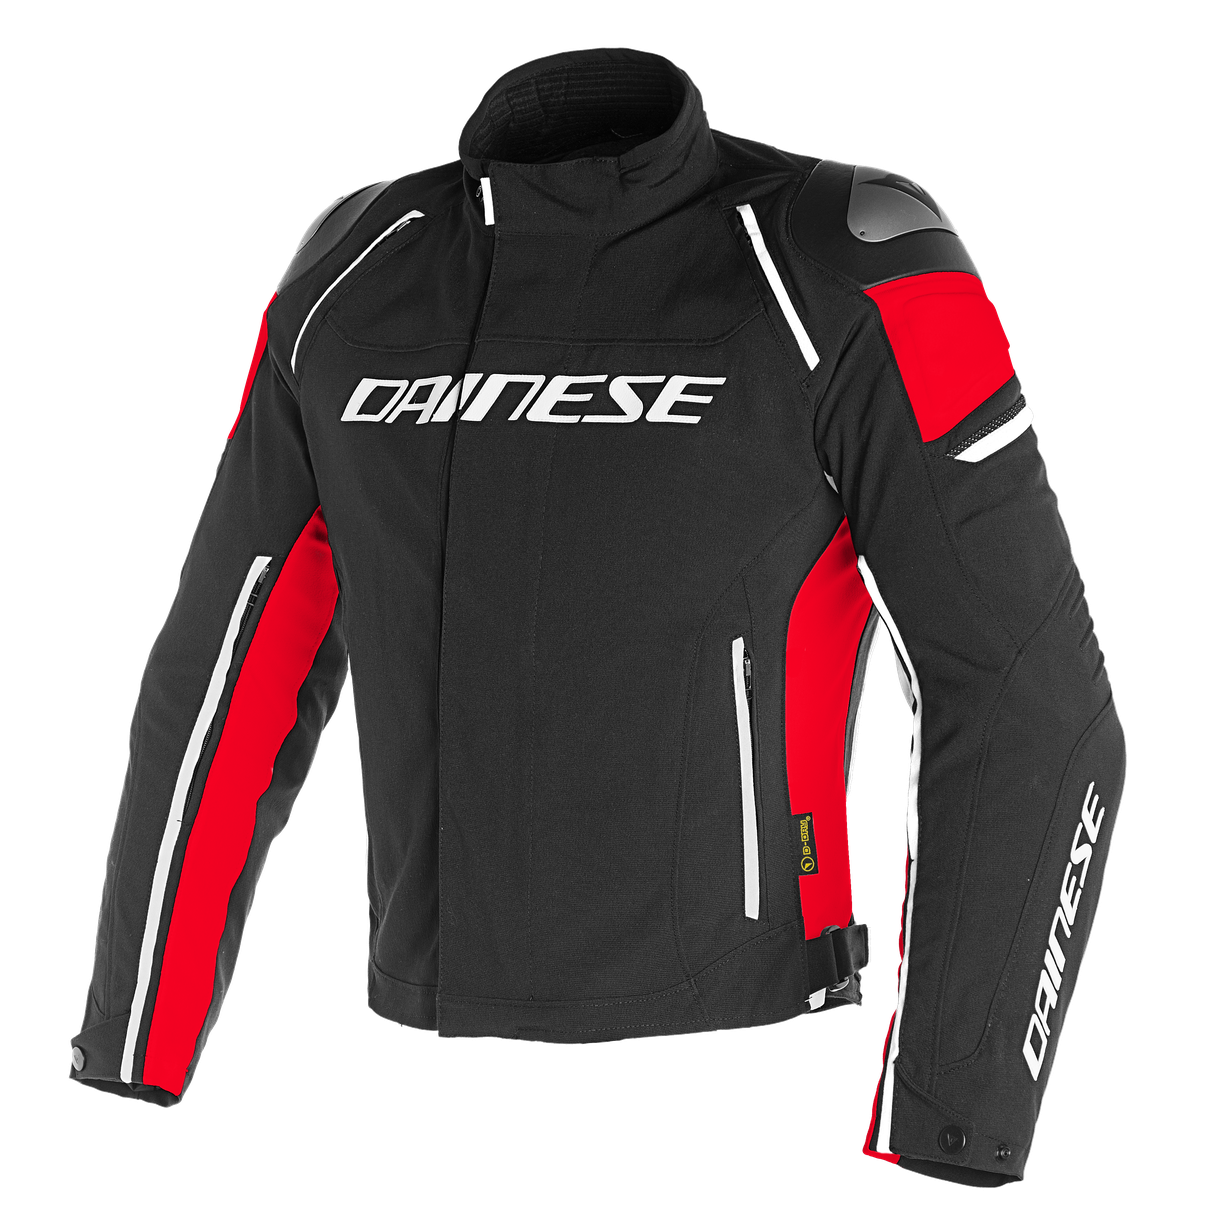 DAINESE GIACCA MOTO UOMO RACING 3 D-DRY JACKET STRADA TOURING NERO ROSSO  BLACK/FLUO-RED